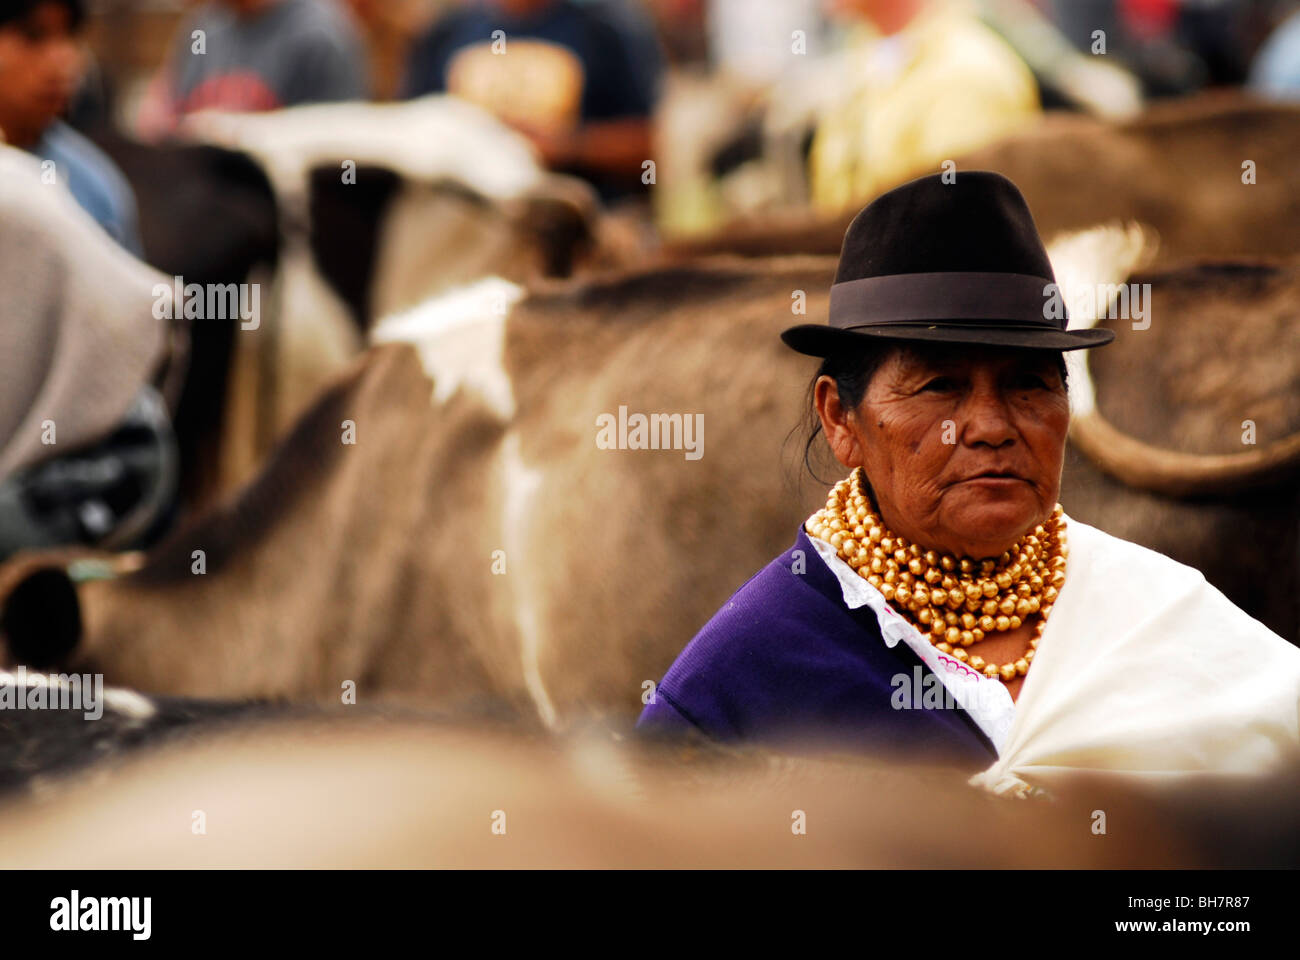 Ecuador, Otavalo, view of a senior woman wearing a black hat and multiple rows of golden pearls surrounded with cows at a cattle Stock Photo